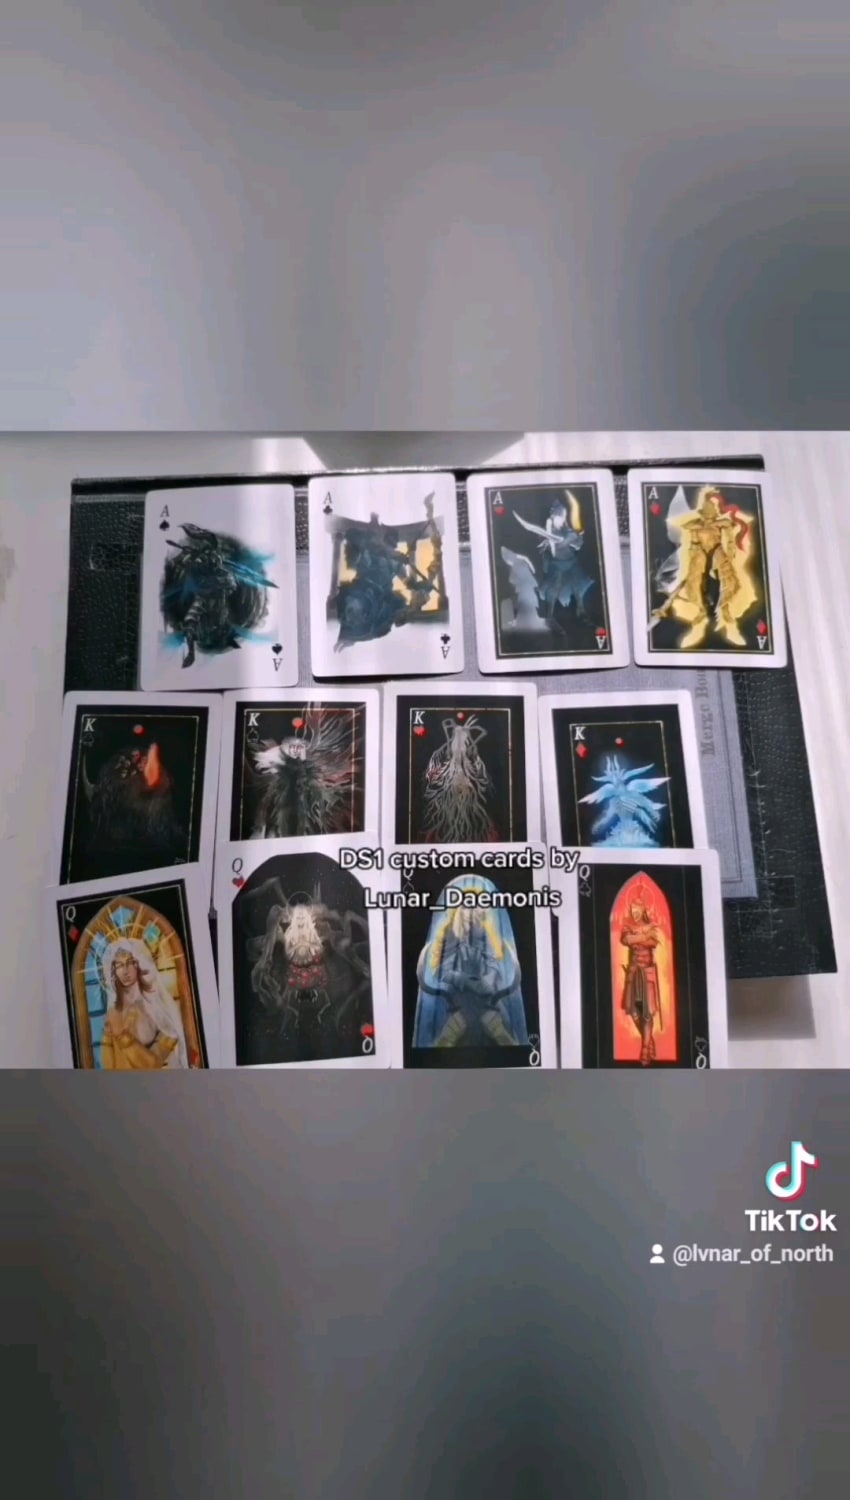 I made DS1 playing cards